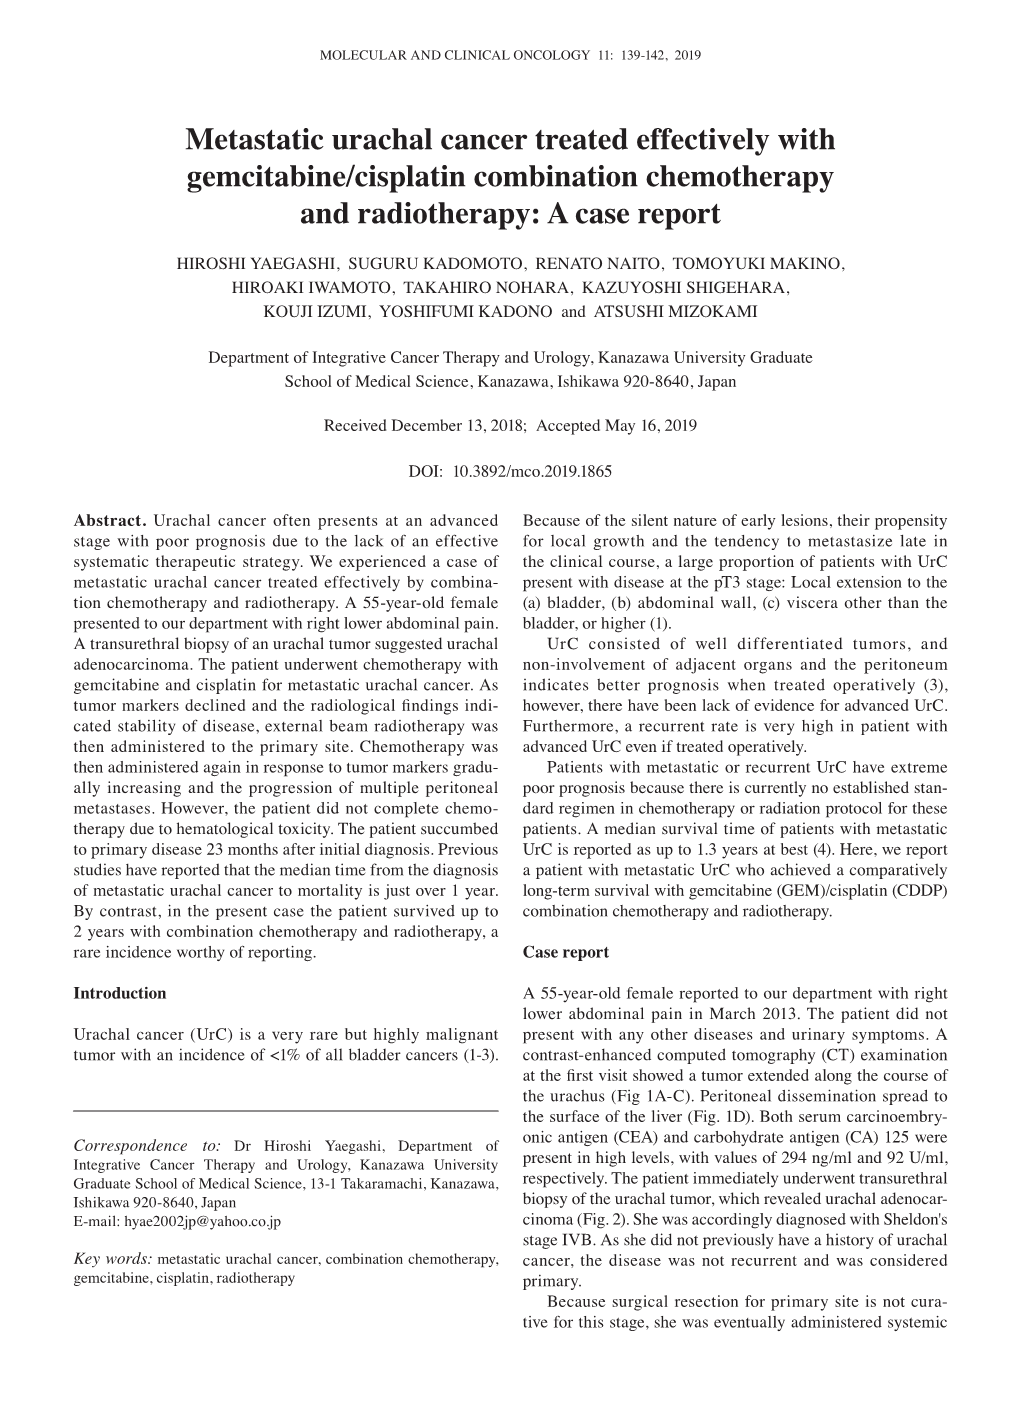 Metastatic Urachal Cancer Treated Effectively with Gemcitabine/Cisplatin Combination Chemotherapy and Radiotherapy: a Case Report